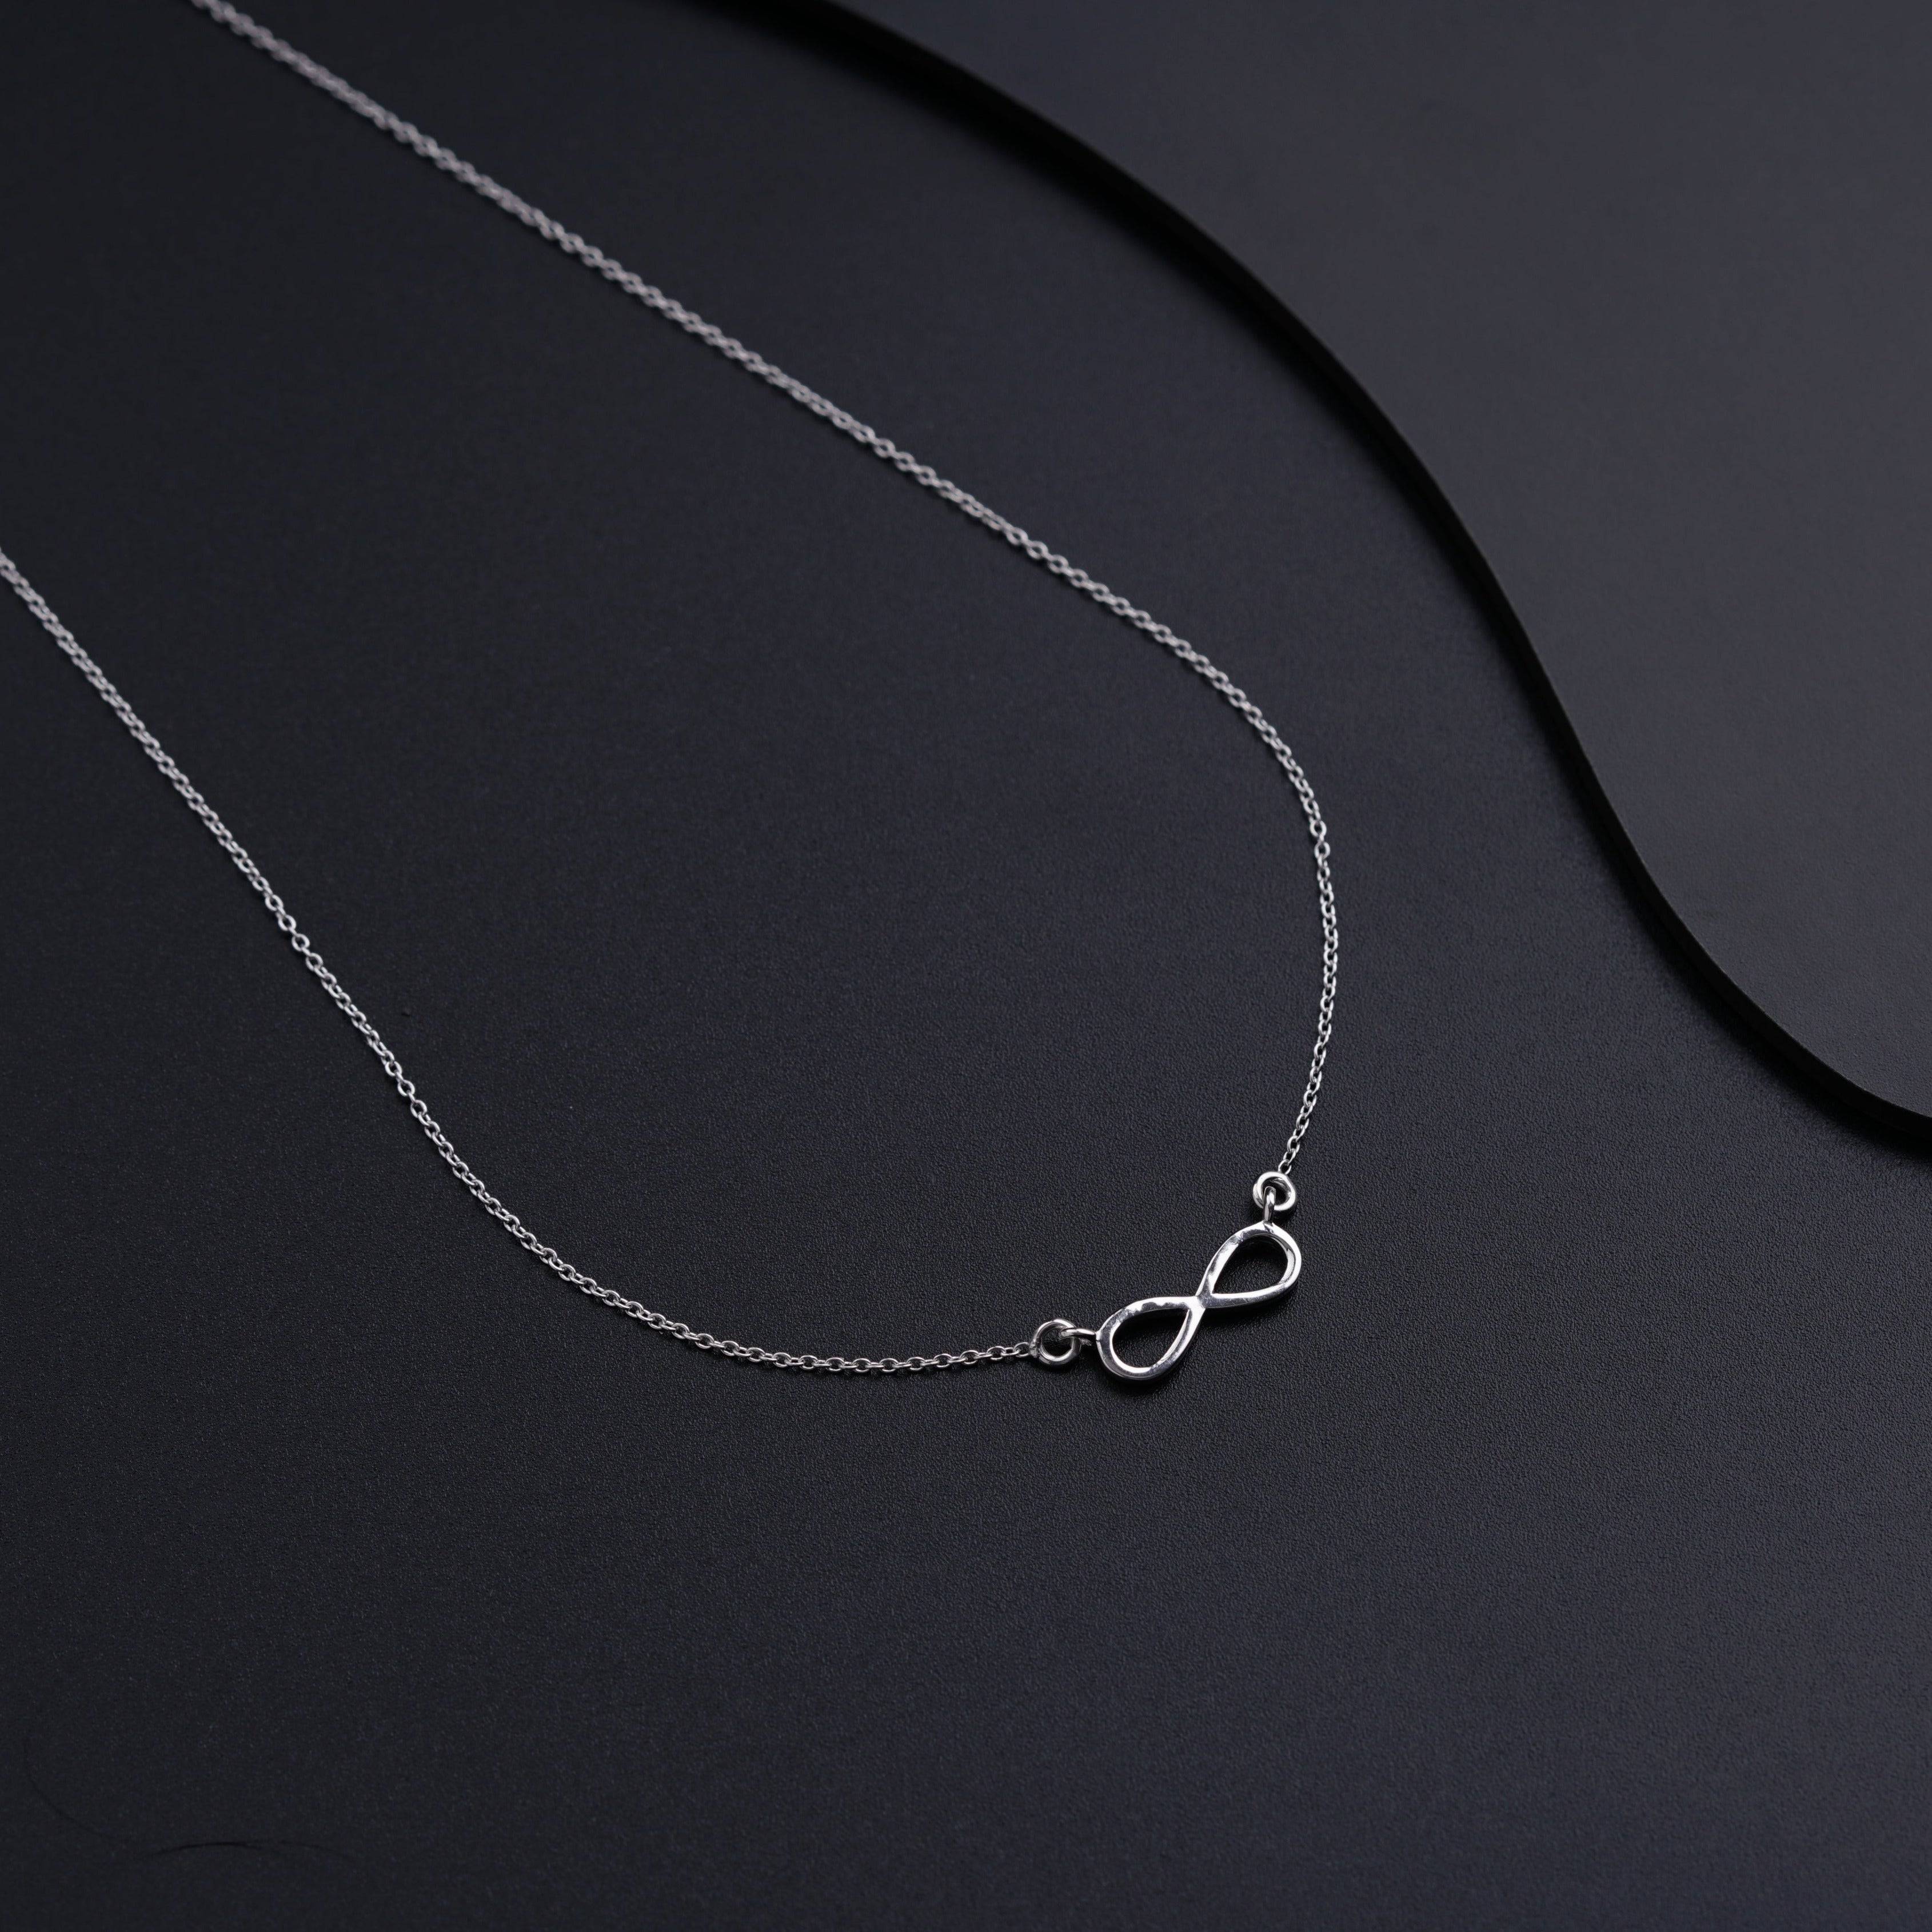 Silver Necklace with Infinity Pendant